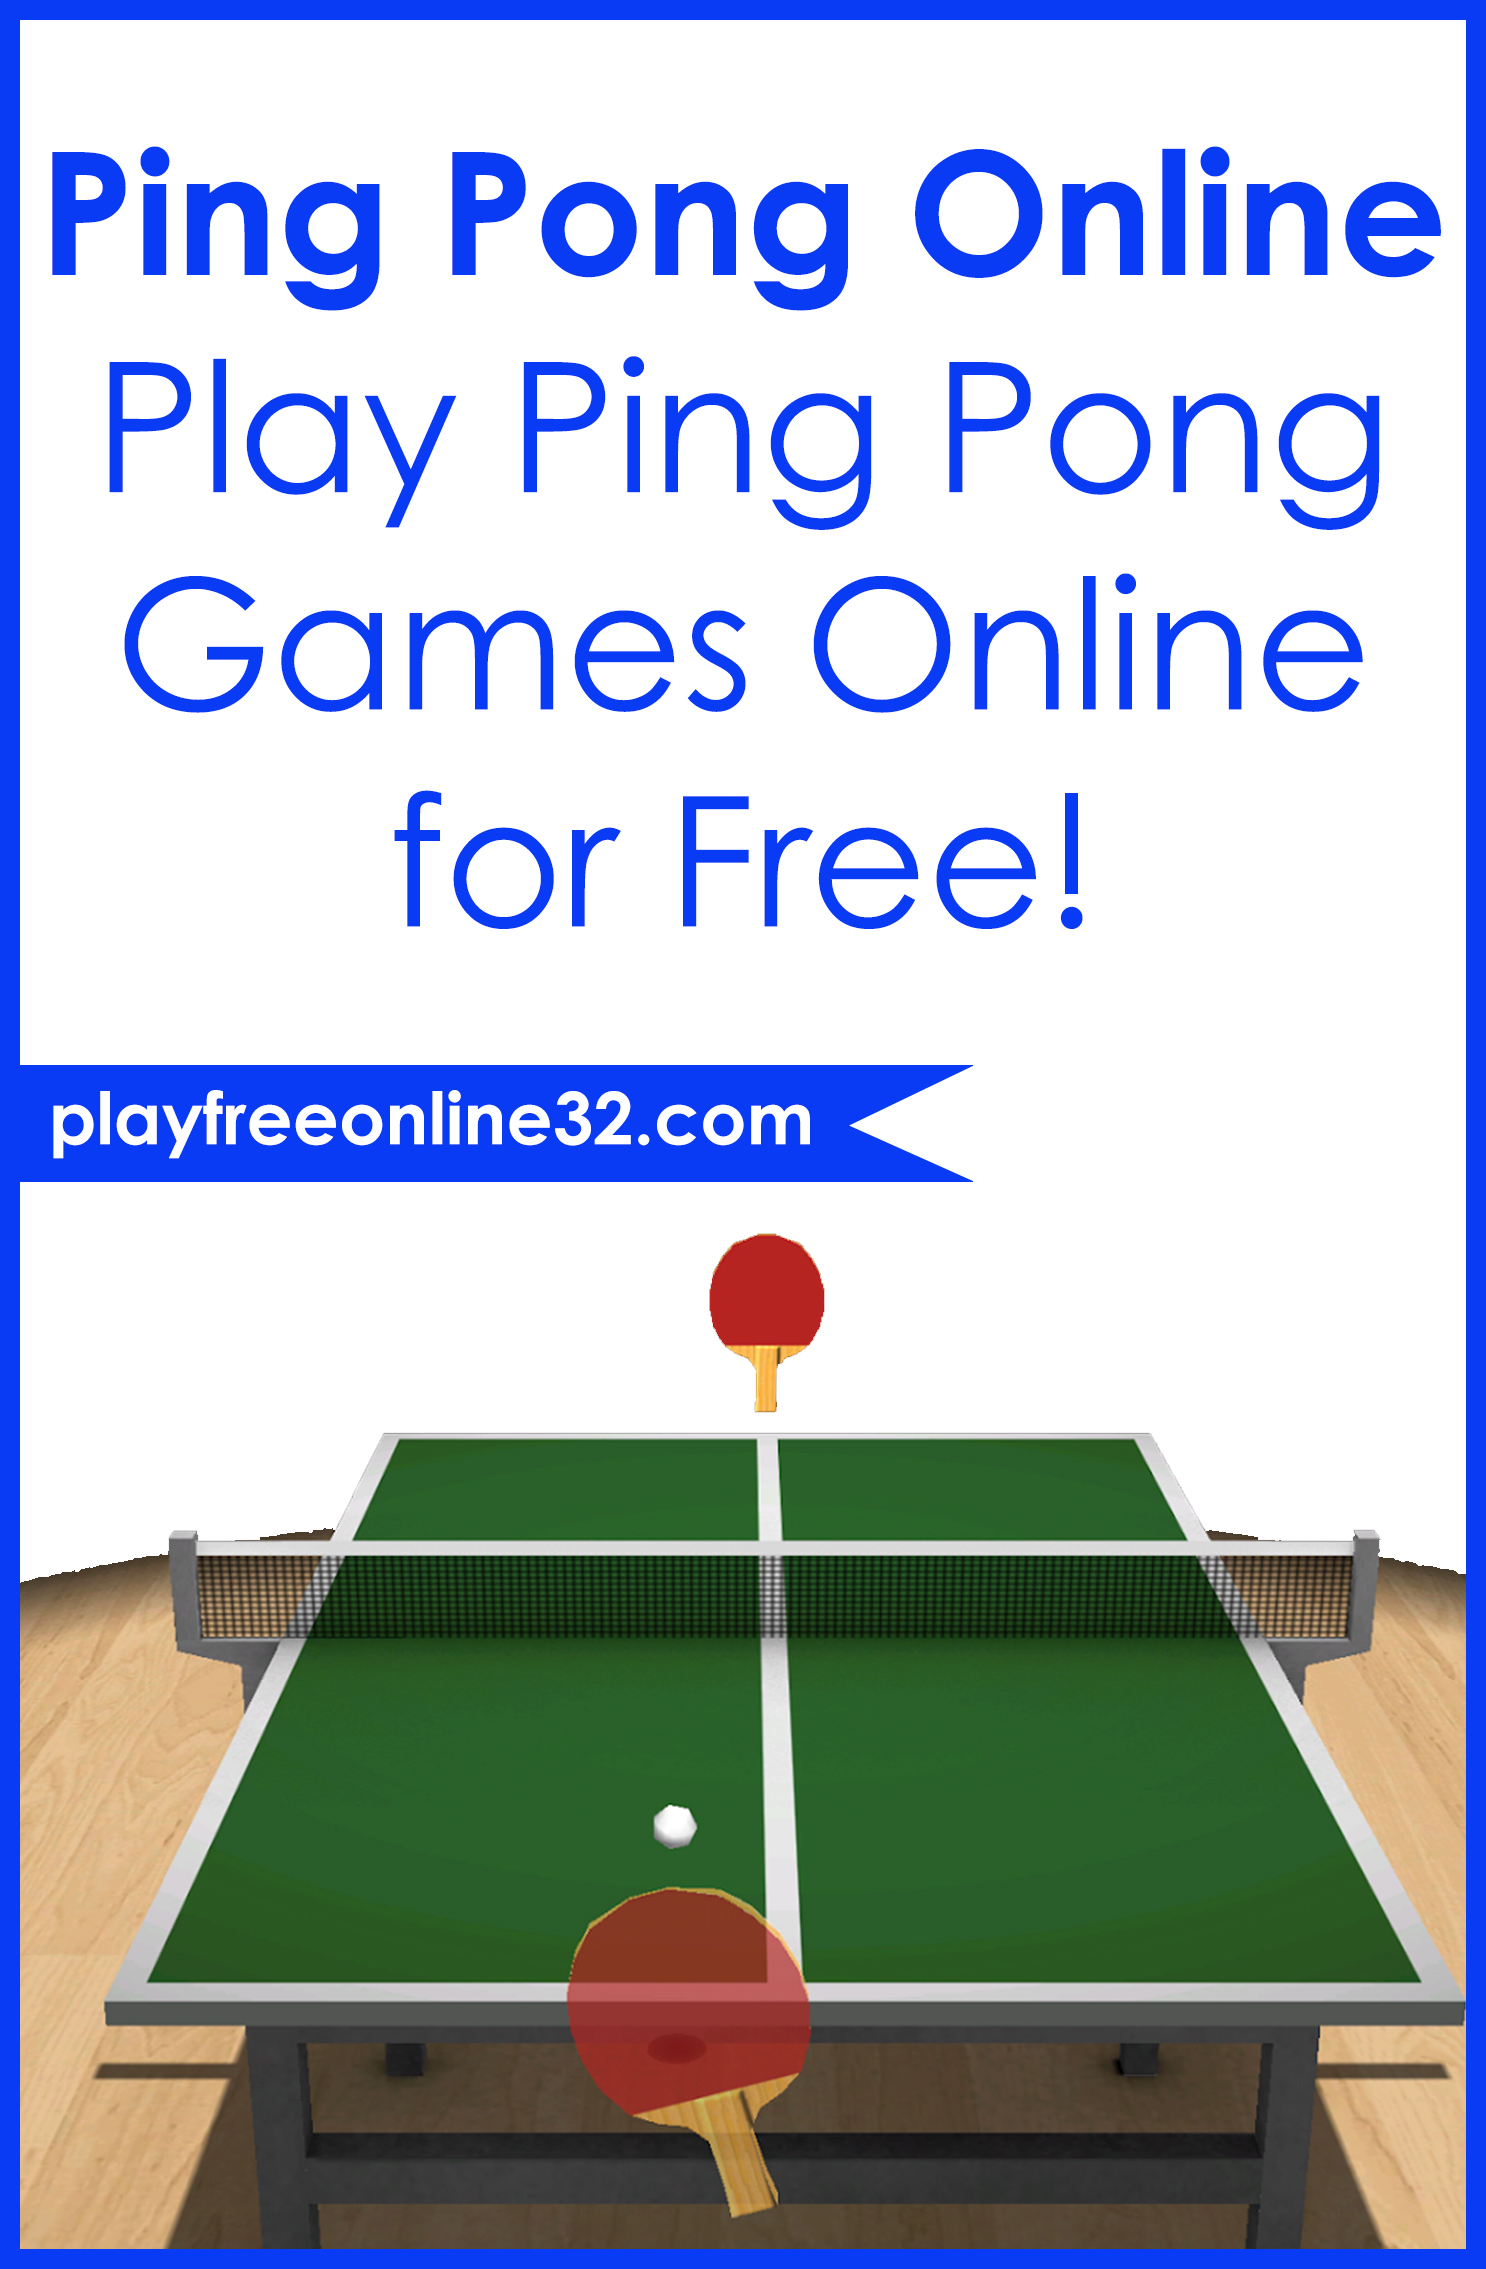 Ping Pong Online